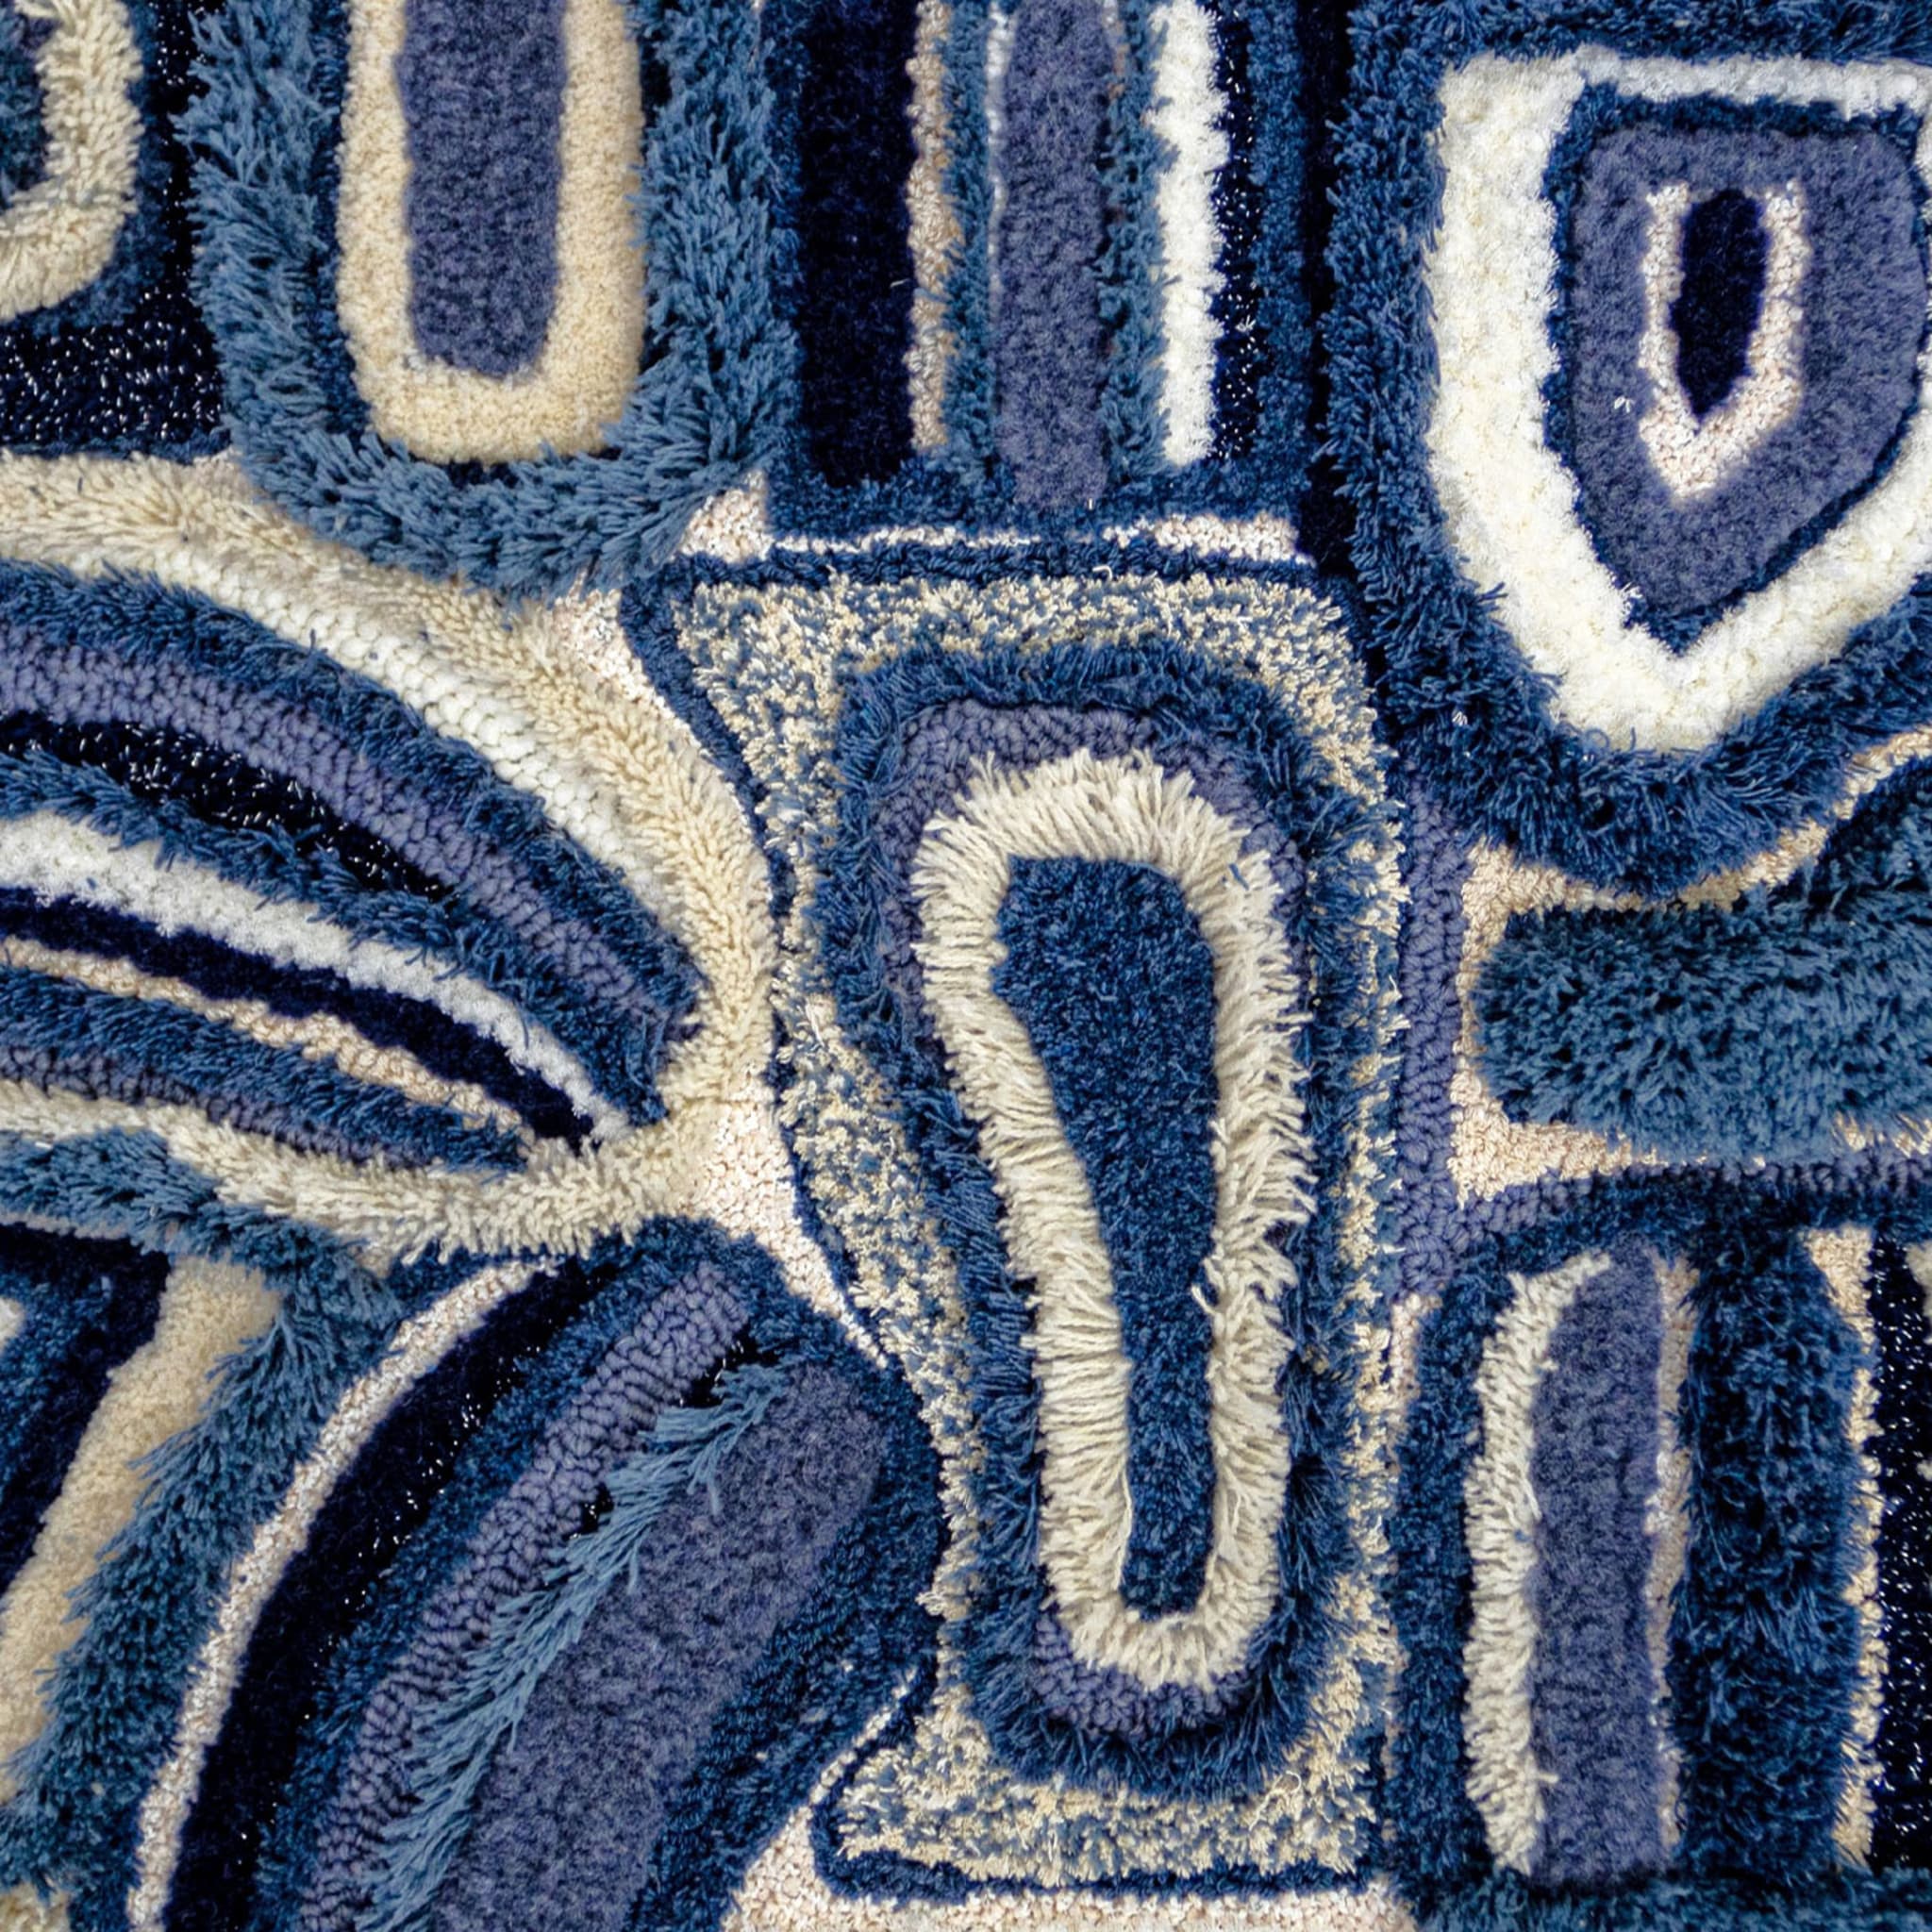  Deconstruction In Delft Blue Tapestry - Alternative view 1